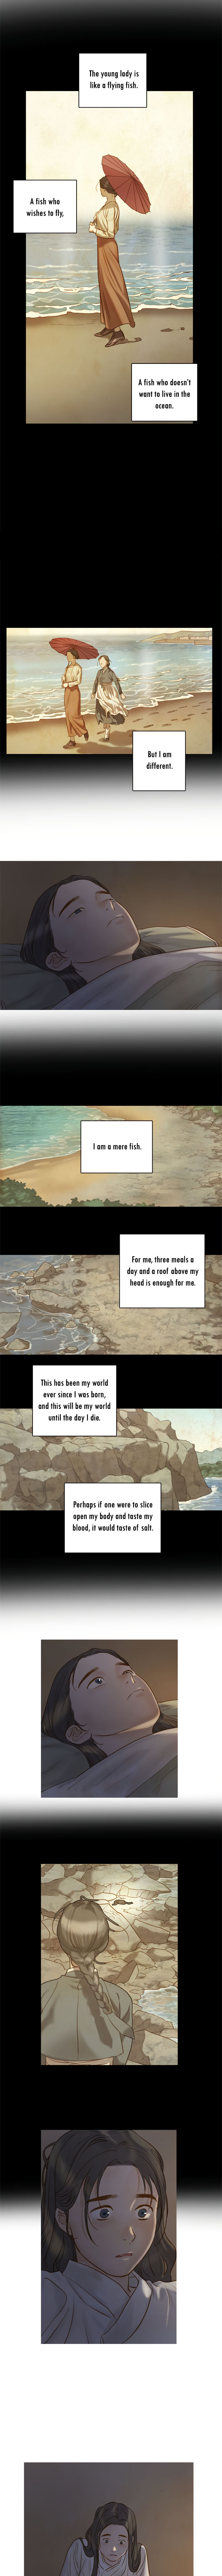 The Whale Star - The Gyeongseong Mermaid - Chapter 2 Page 10